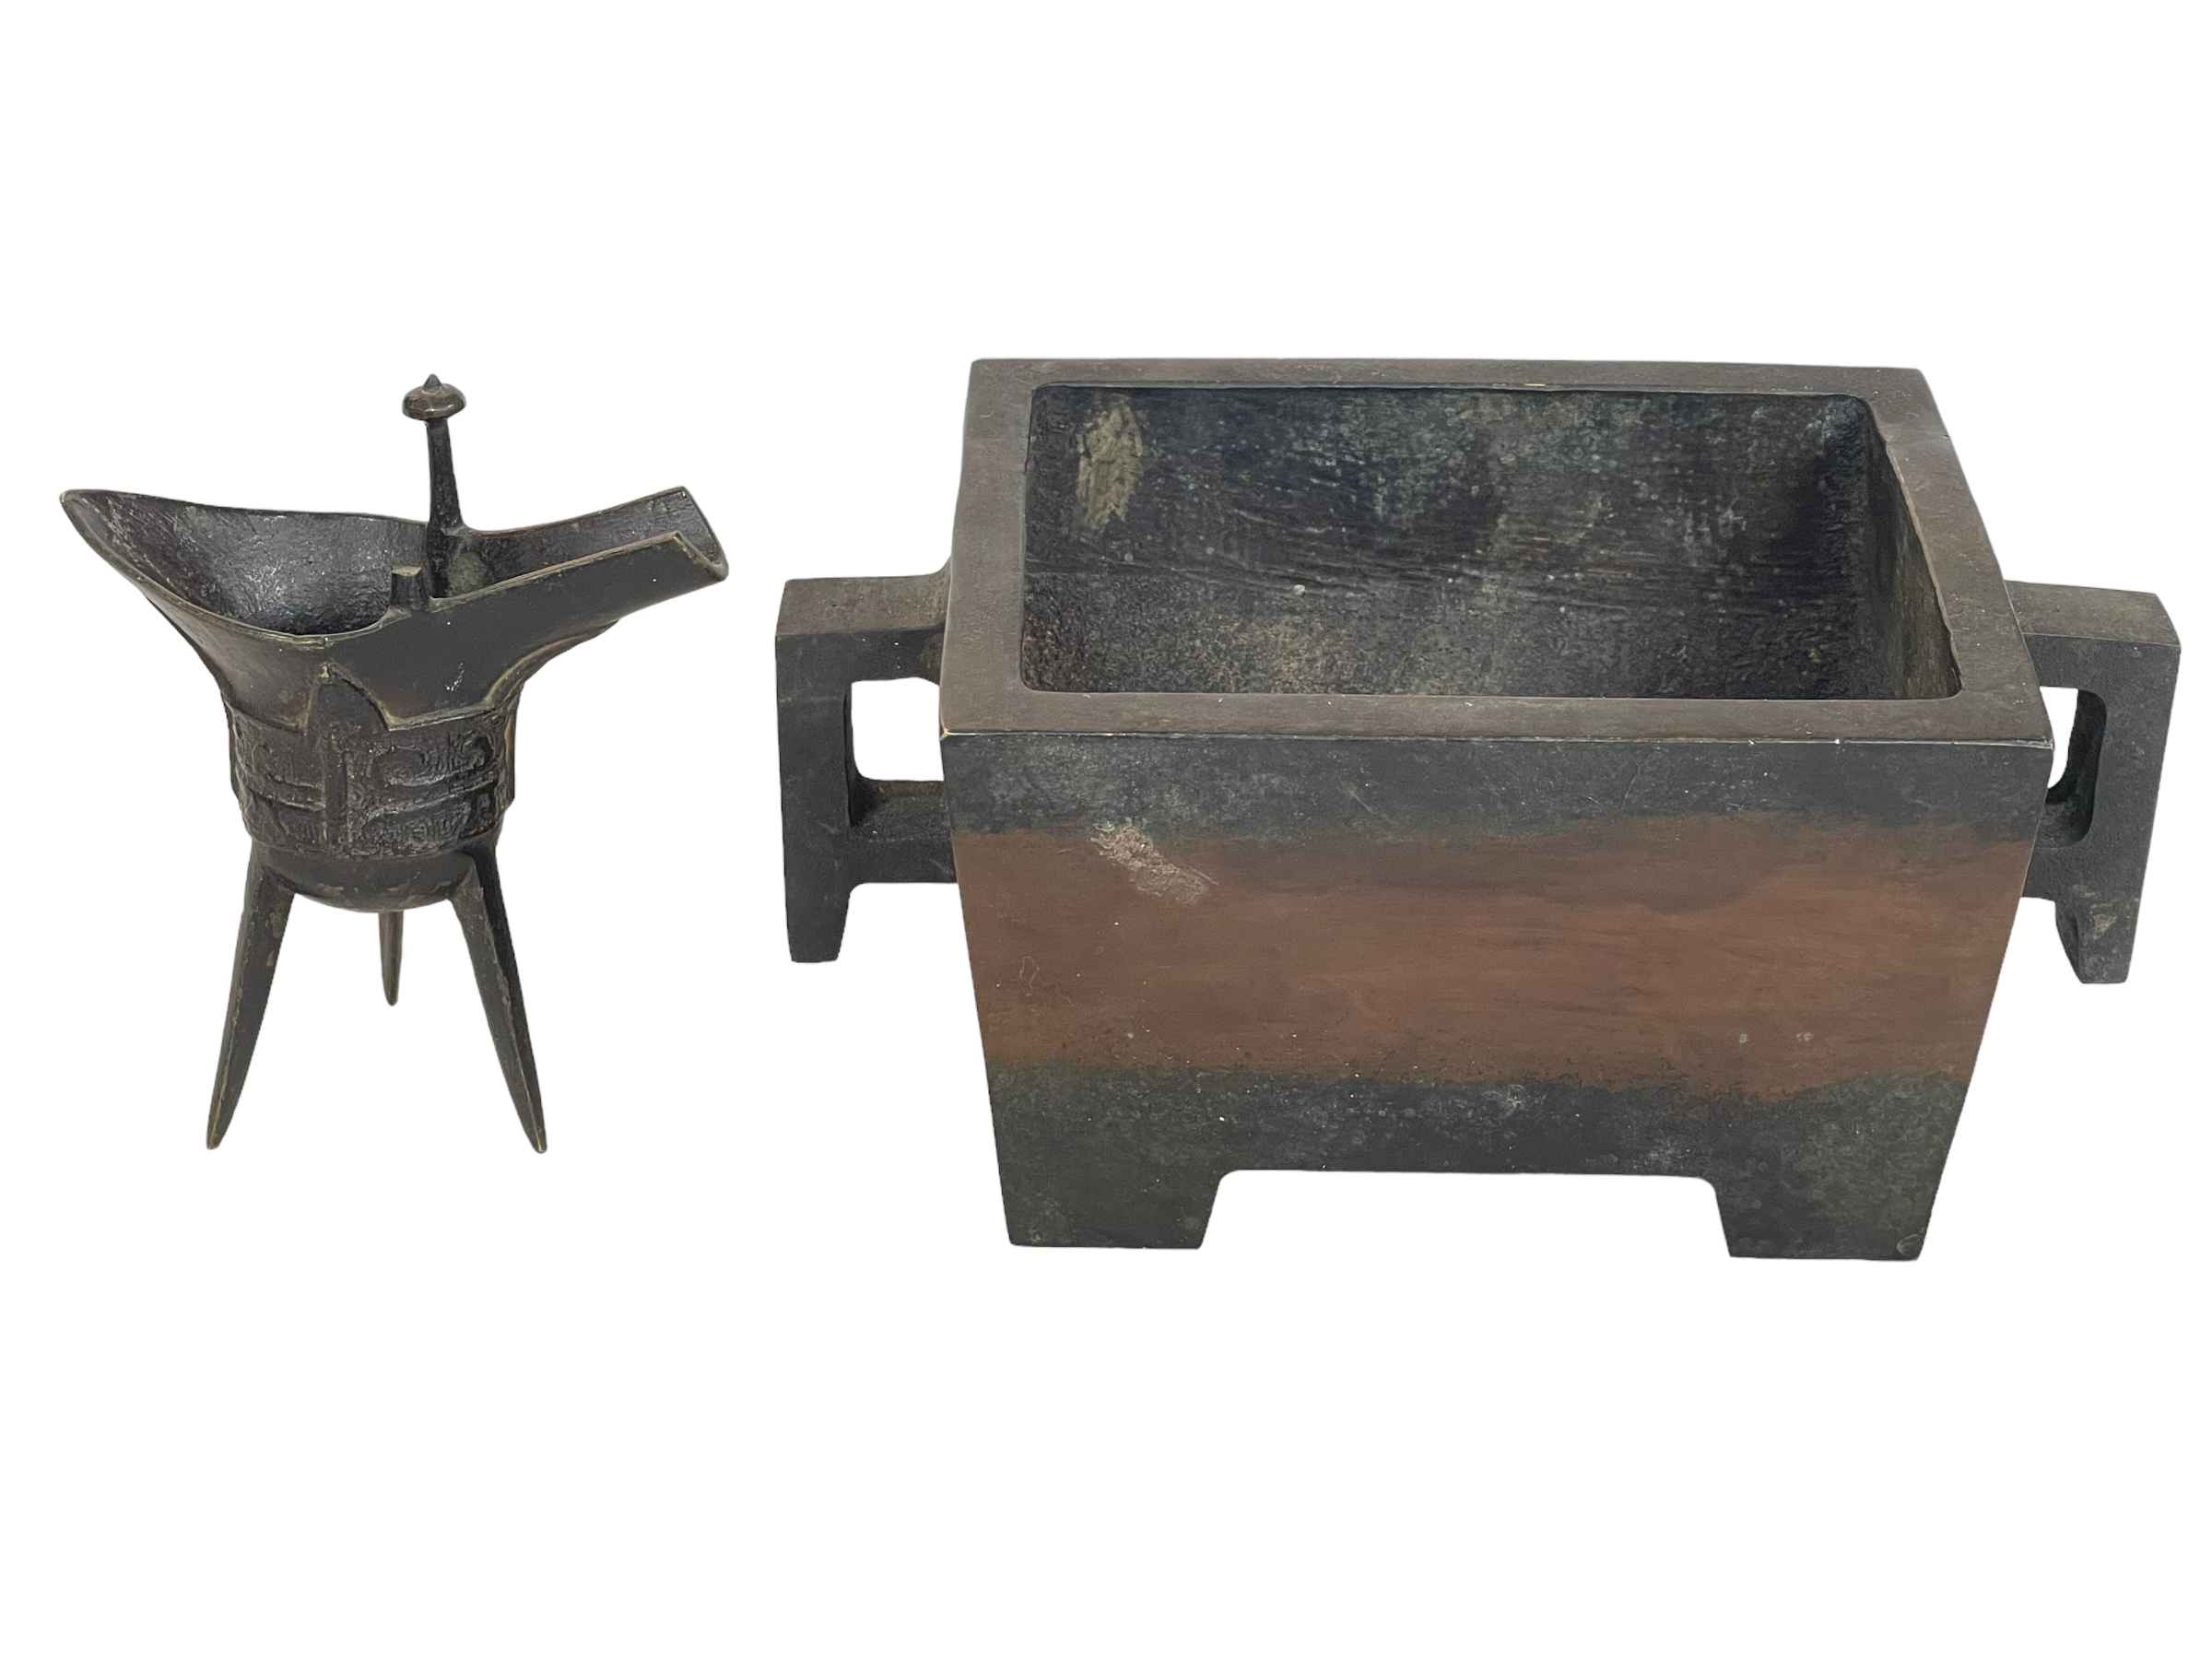 Two Chinese bronze censors.